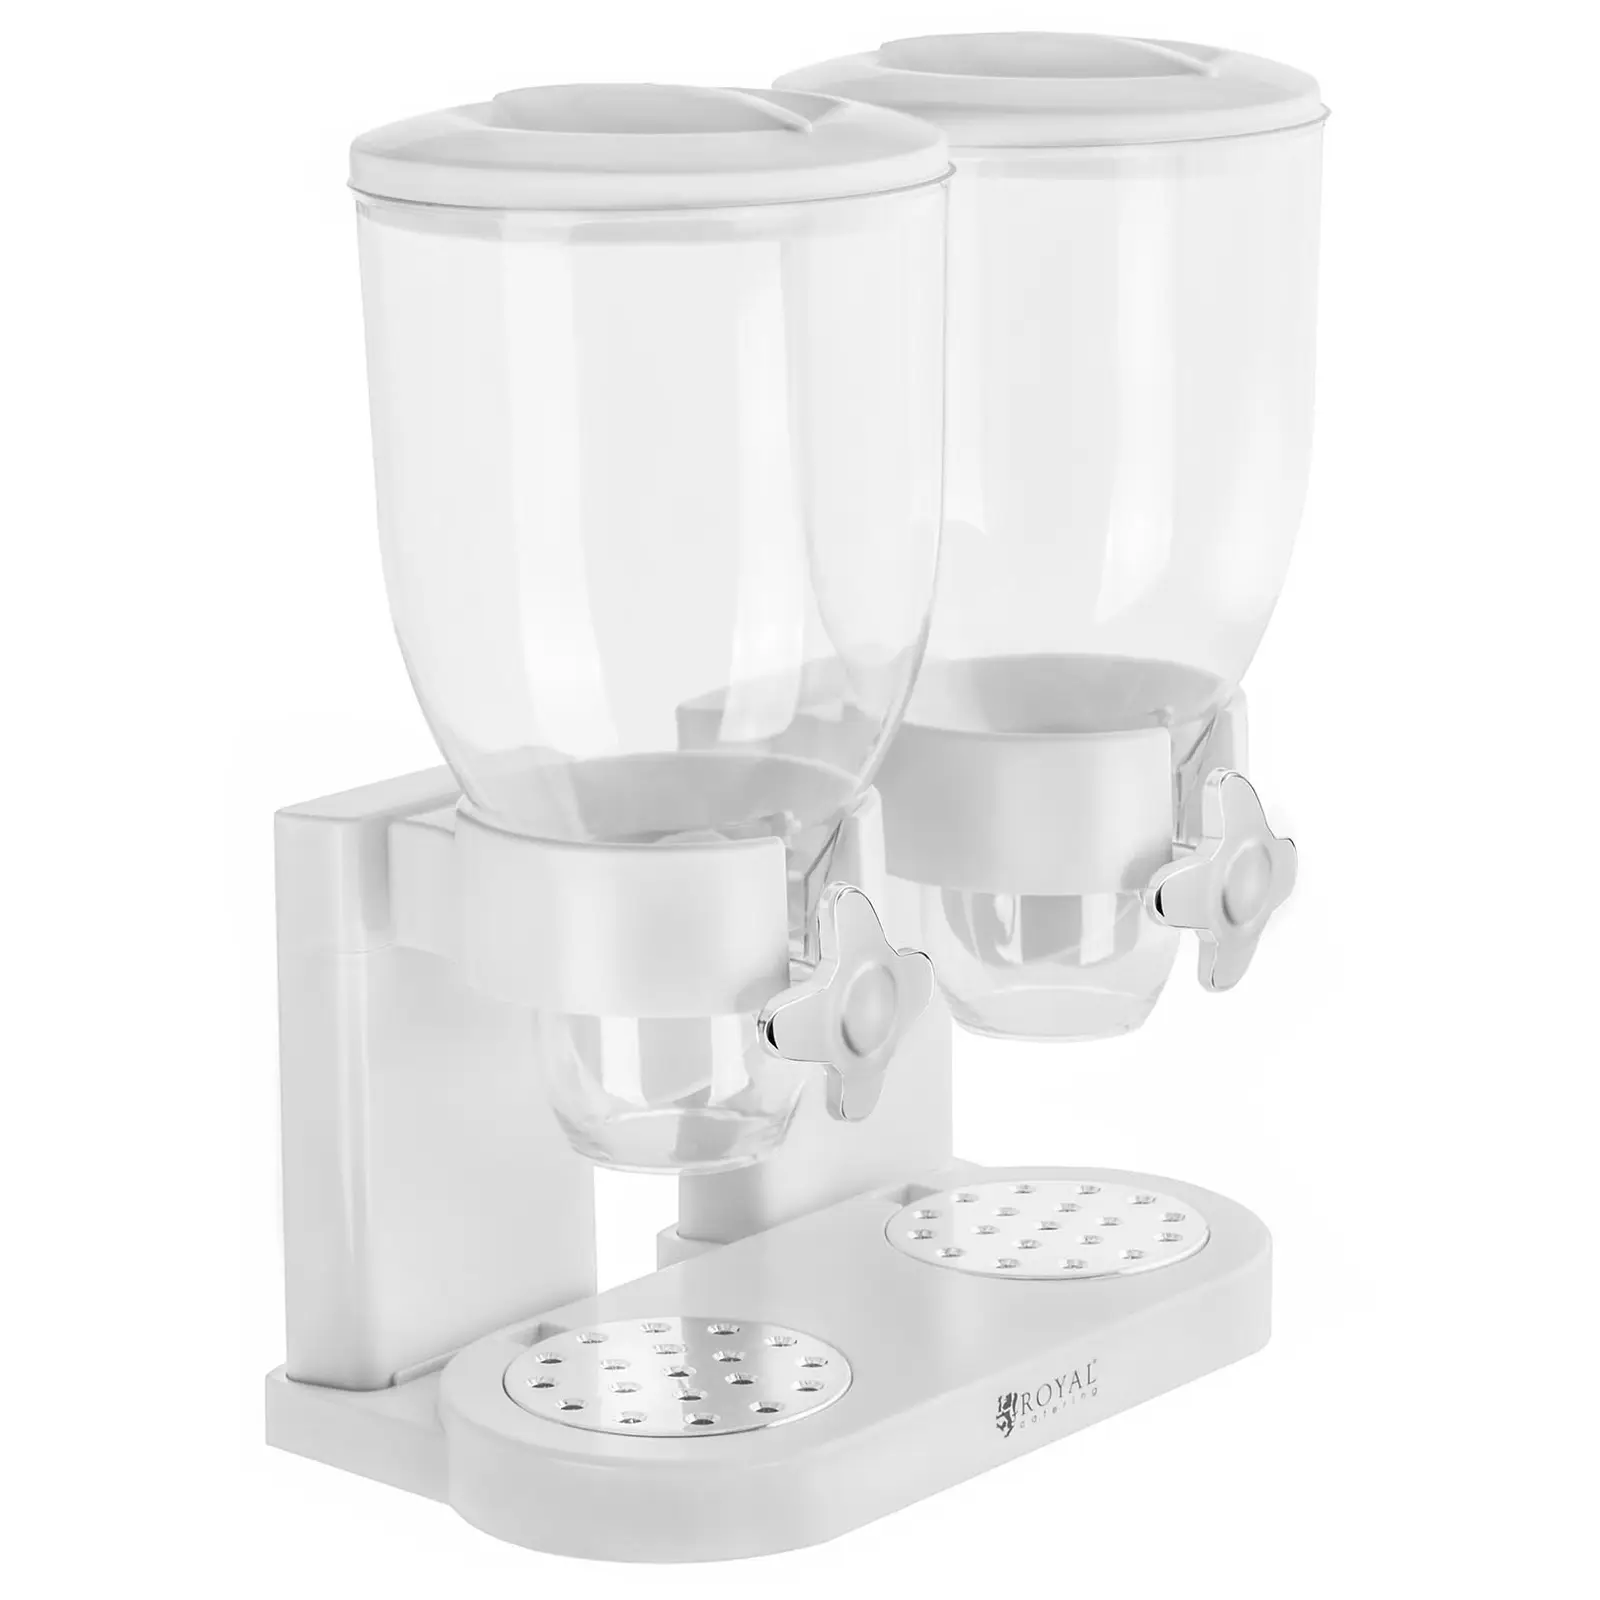 Cereal Dispenser 7 L - 2 containers